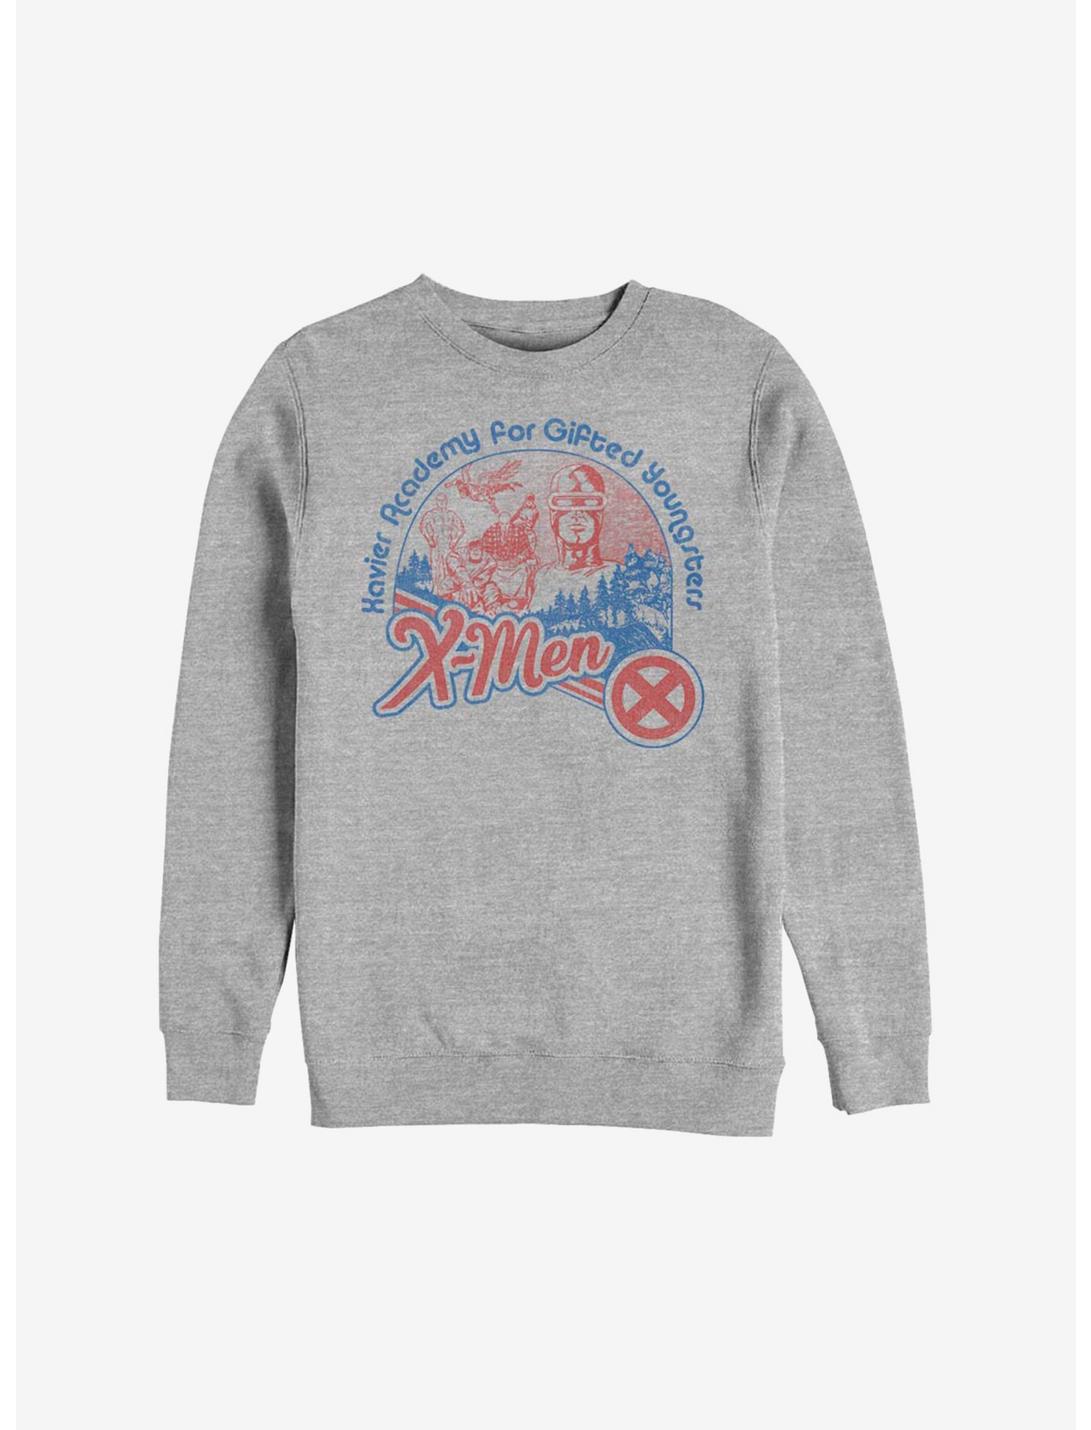 Marvel X-Men Academy For Gifted Youngsters Sweatshirt, ATH HTR, hi-res